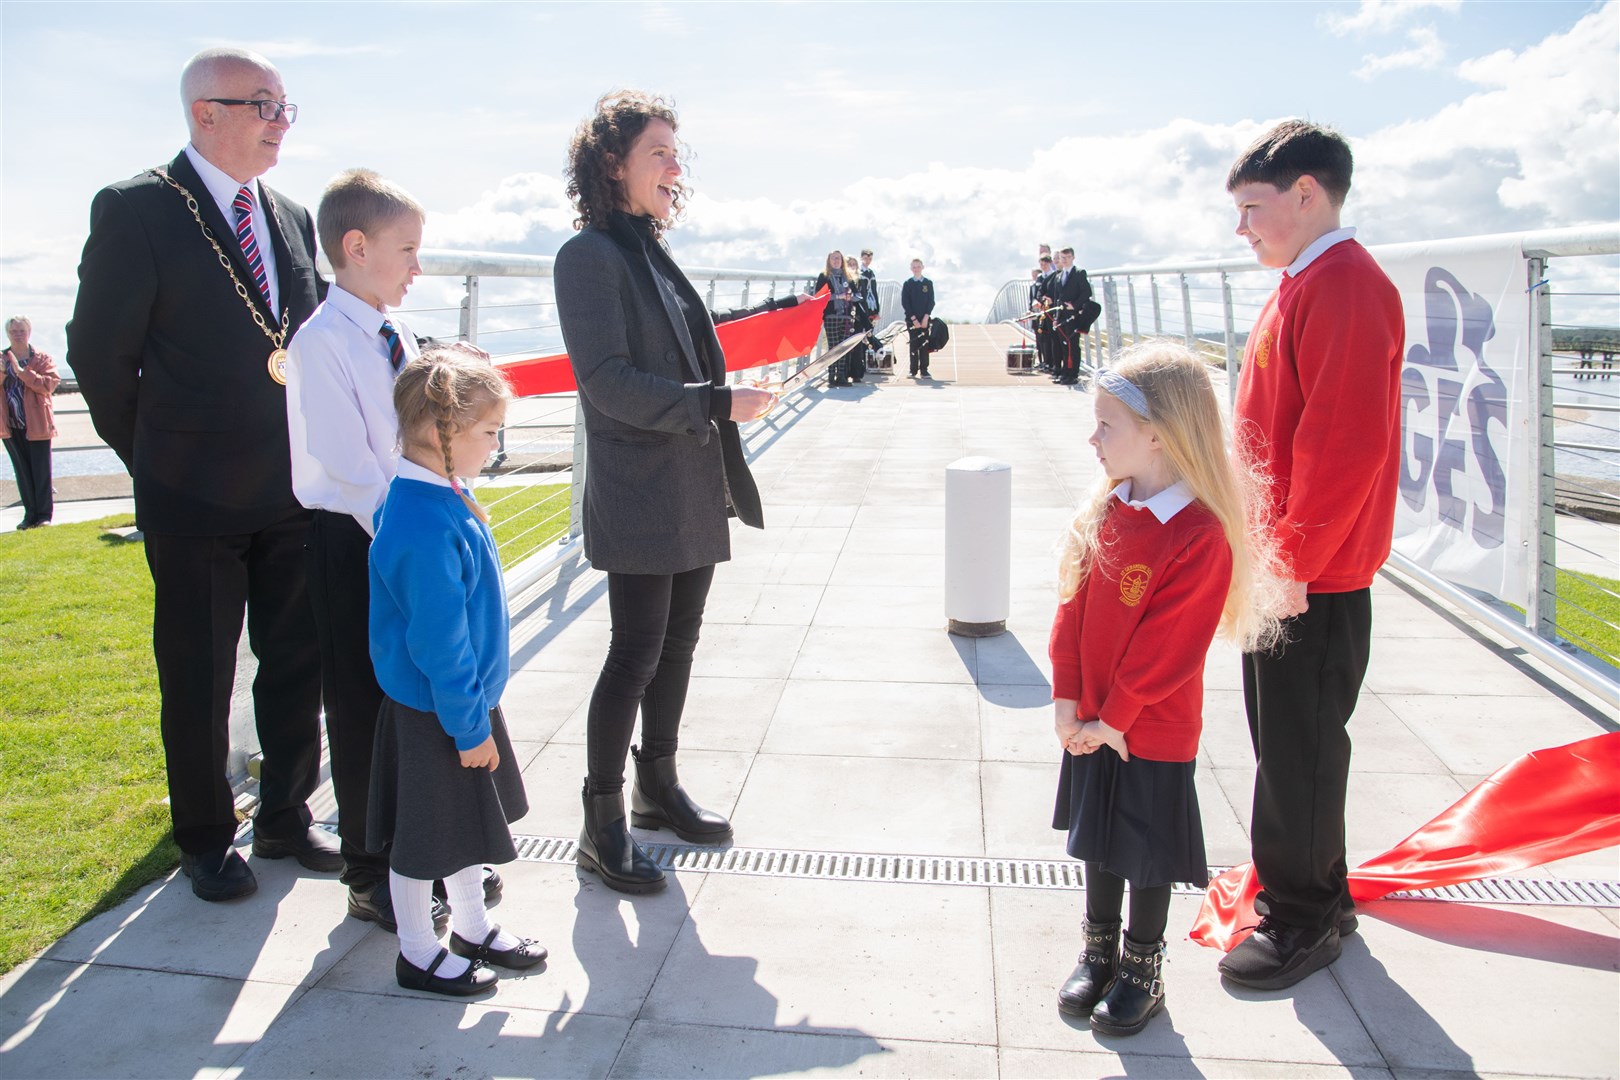 Cabinet Secretary Mairi Gougeon cuts the ribbon with the help of Hythehill pupils Jordan Muir and Ruby Watts (left), St Gerardine pupils Aiden Ingram and Lola Thomson, watched by Moray Council Convener Cllr Marc Macrae. Picture: Daniel Forsyth